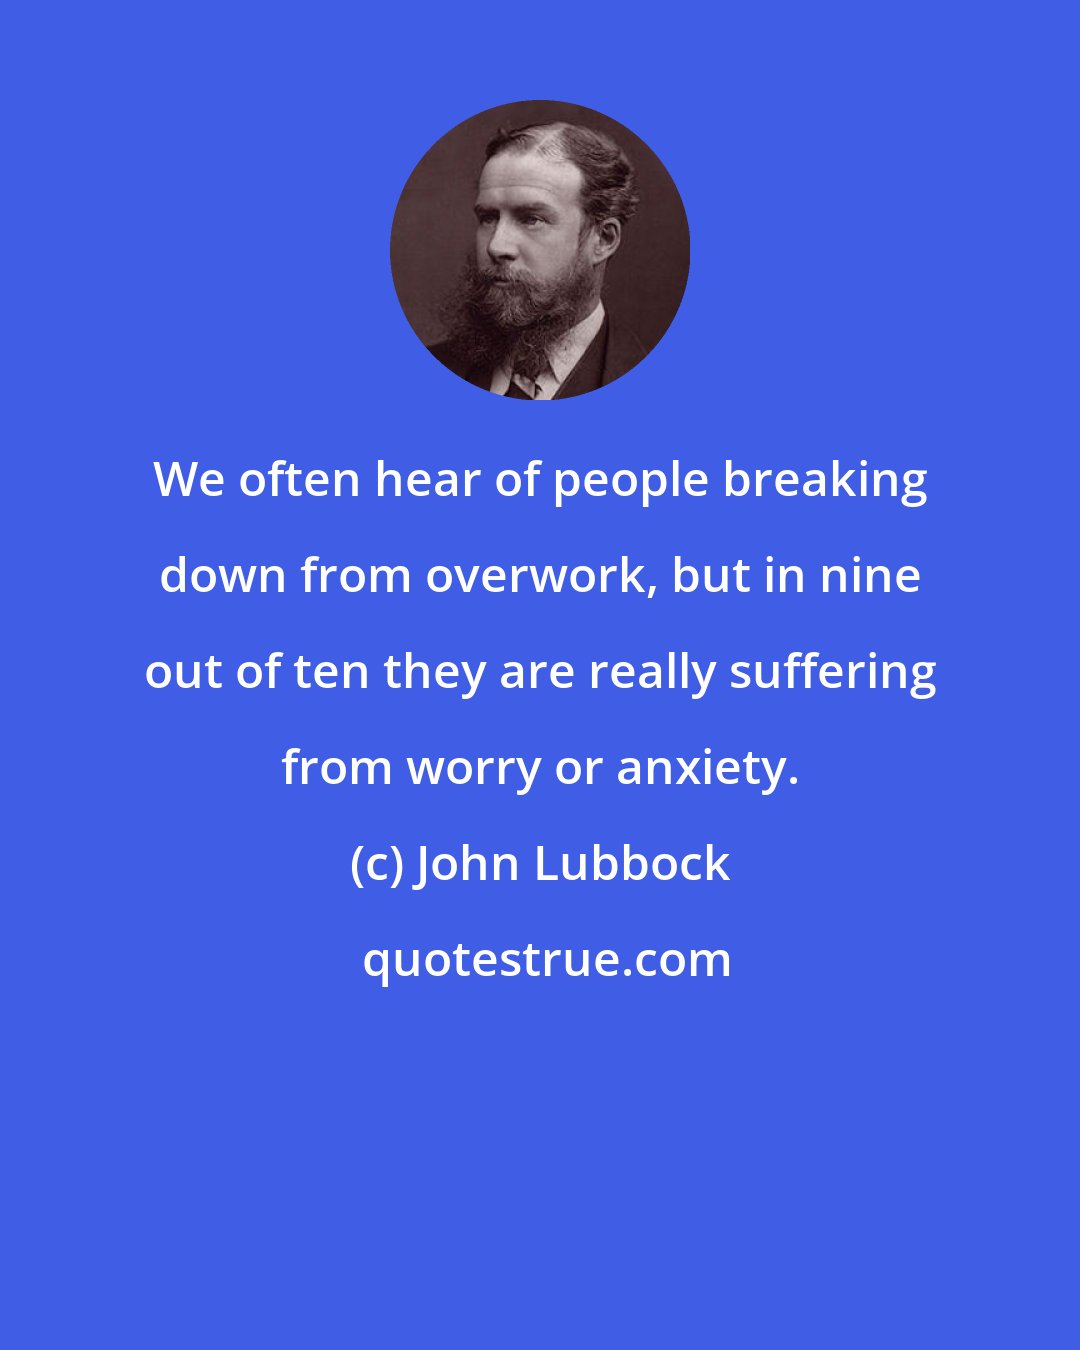 John Lubbock: We often hear of people breaking down from overwork, but in nine out of ten they are really suffering from worry or anxiety.